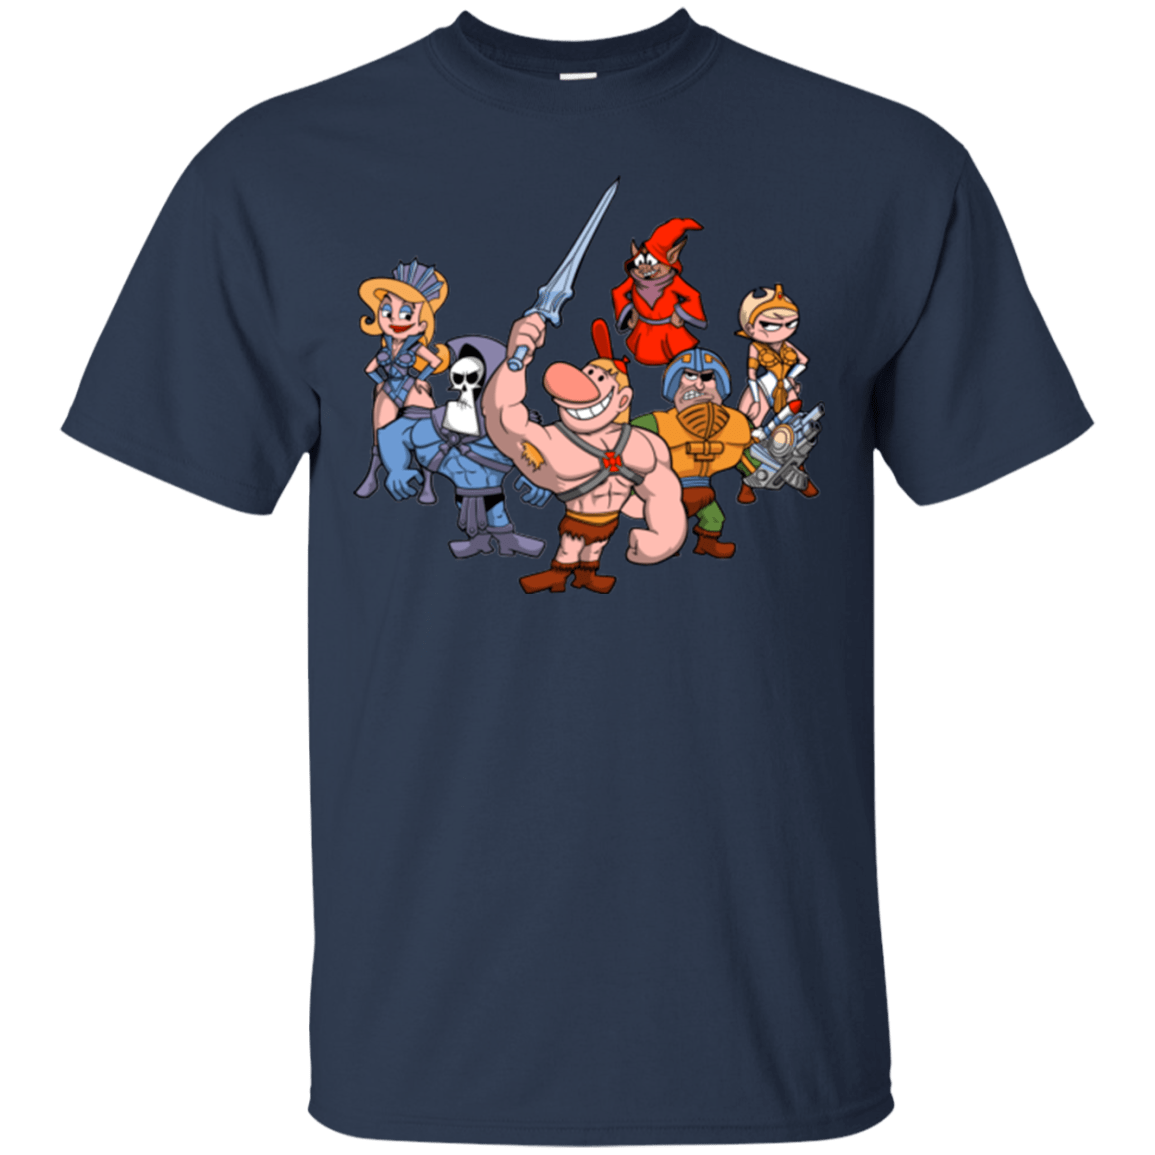 T-Shirts Navy / Small Masters of the Grimverse T-Shirt